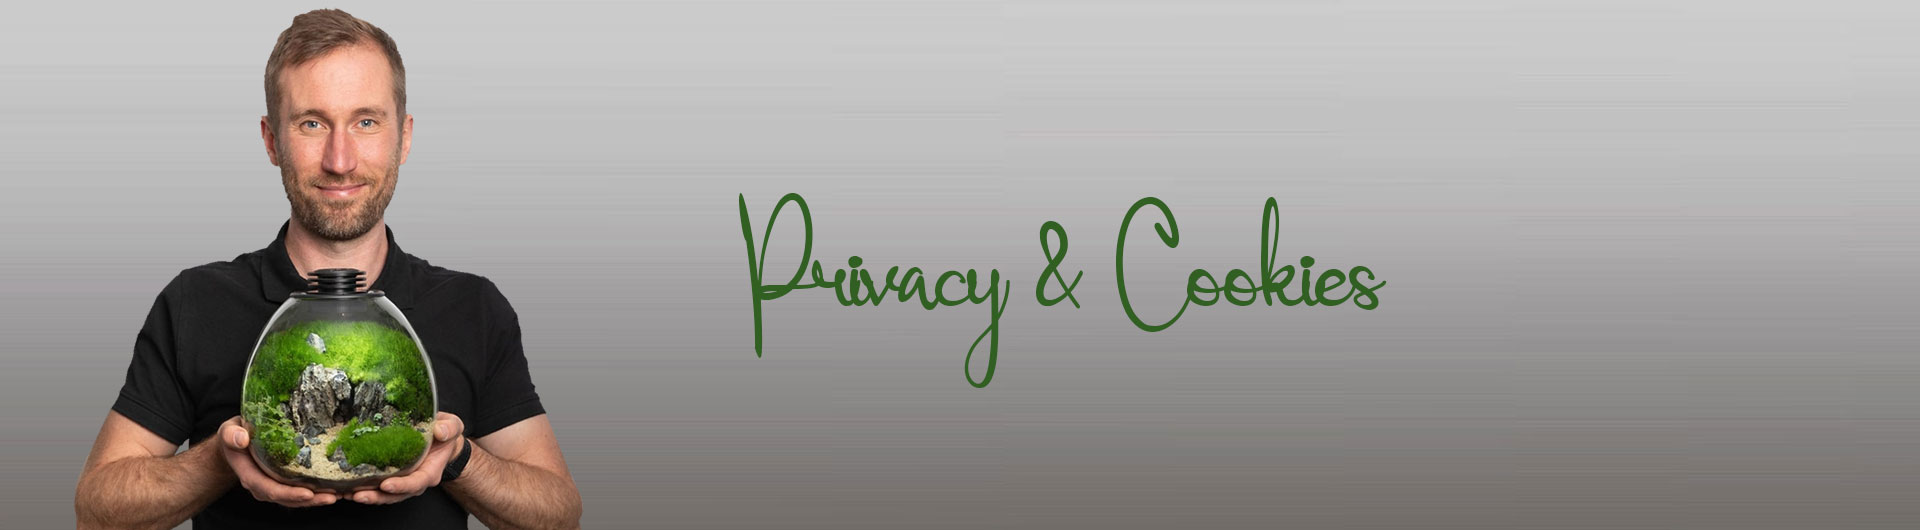 Privacy & Cookies